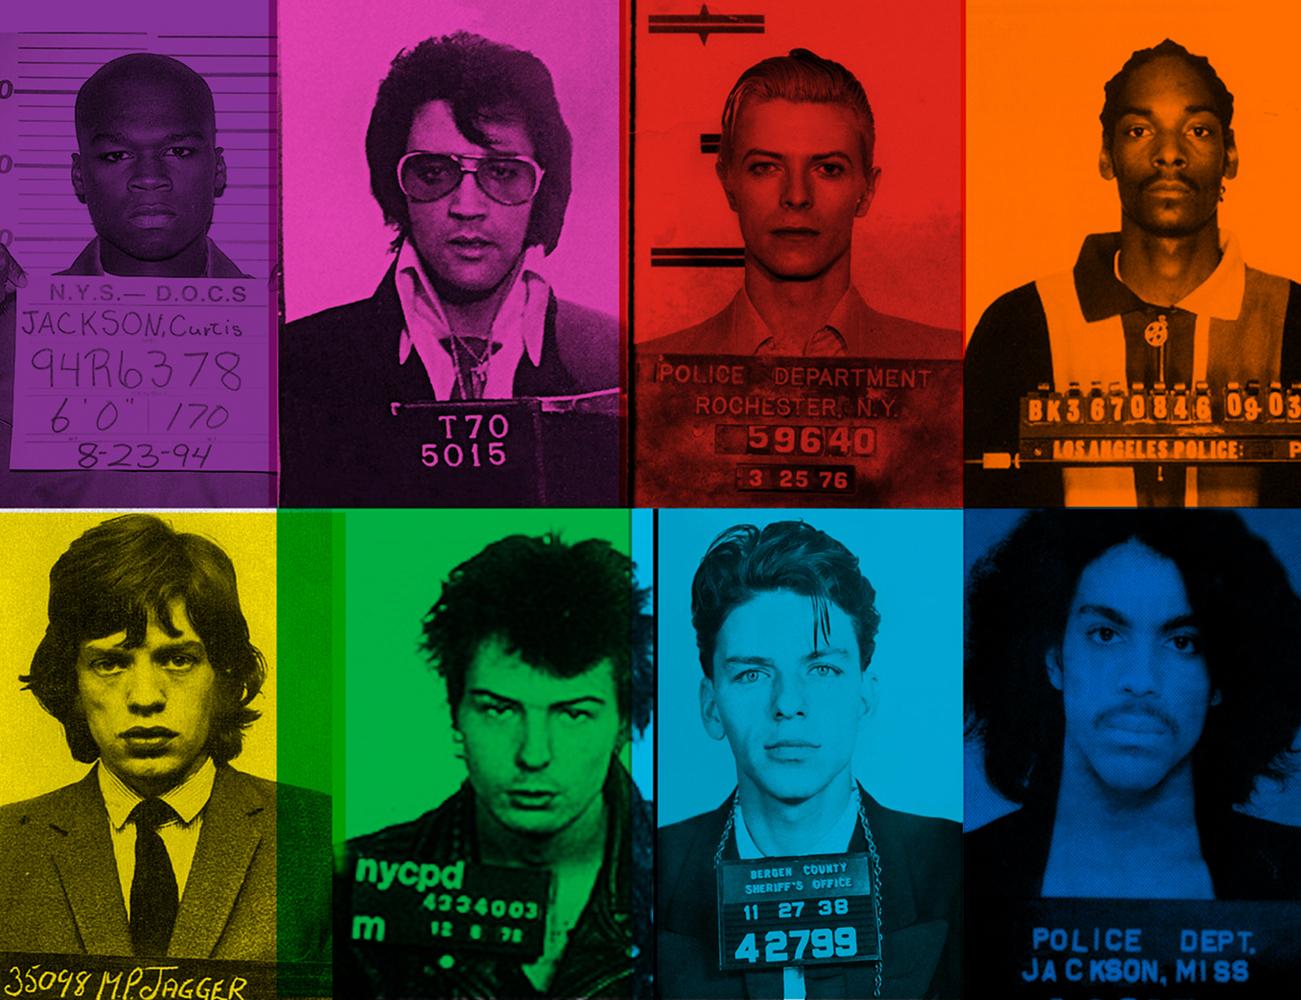 Fun Loving Criminals by BATIK signed limited edition POP ART print 

Paper Size 20x16" inches / 51 x 41 cm
Signed & numbered by artist on front
Archival Pigment print 
Limited to 50 only 

Featuring police arrest mugshot photos of Fifty Cent, Elvis